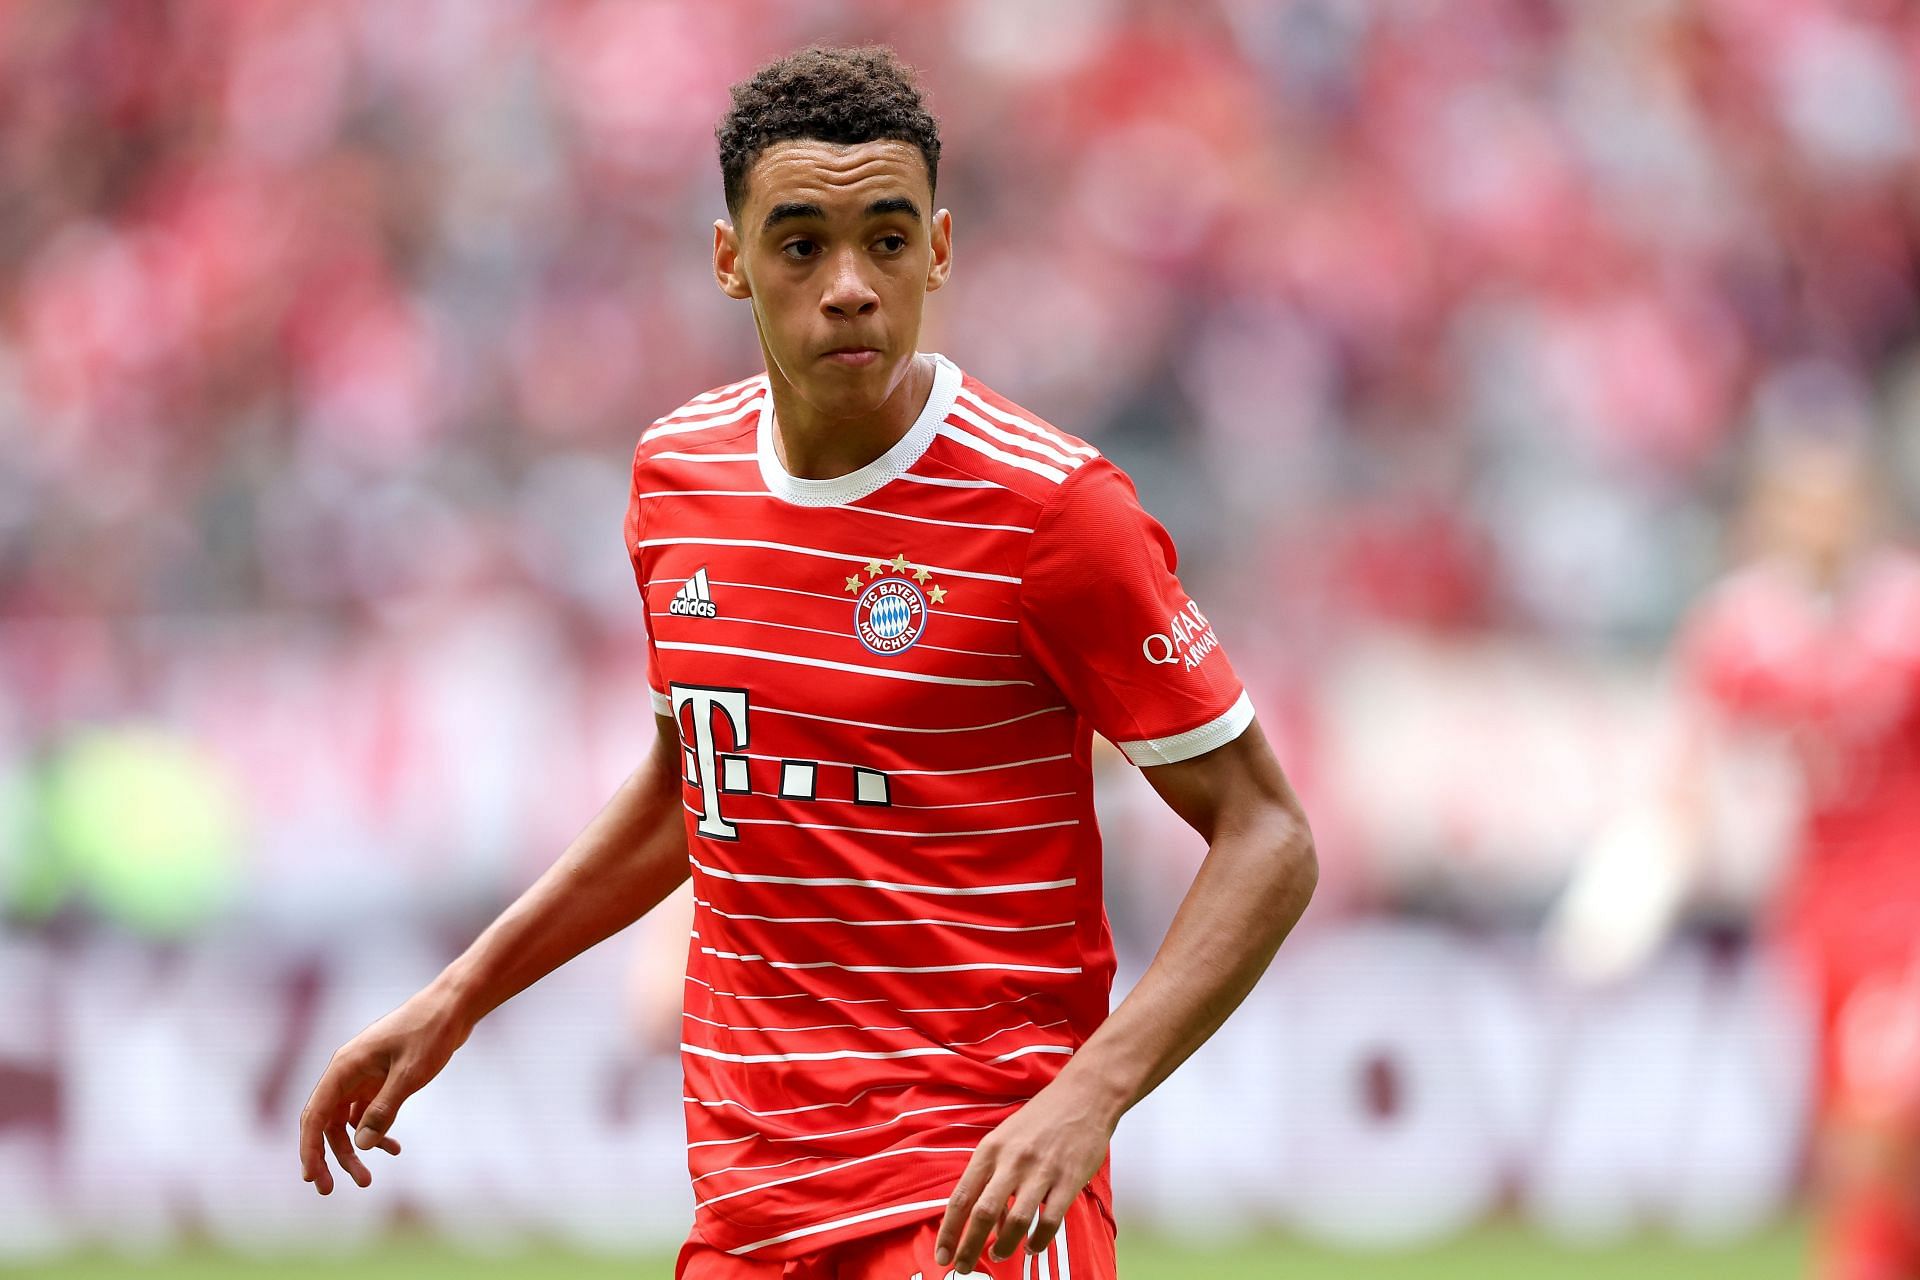 Jamal Musiala has shown his value for Bayern Munich since joining the Bavarians three years ago.